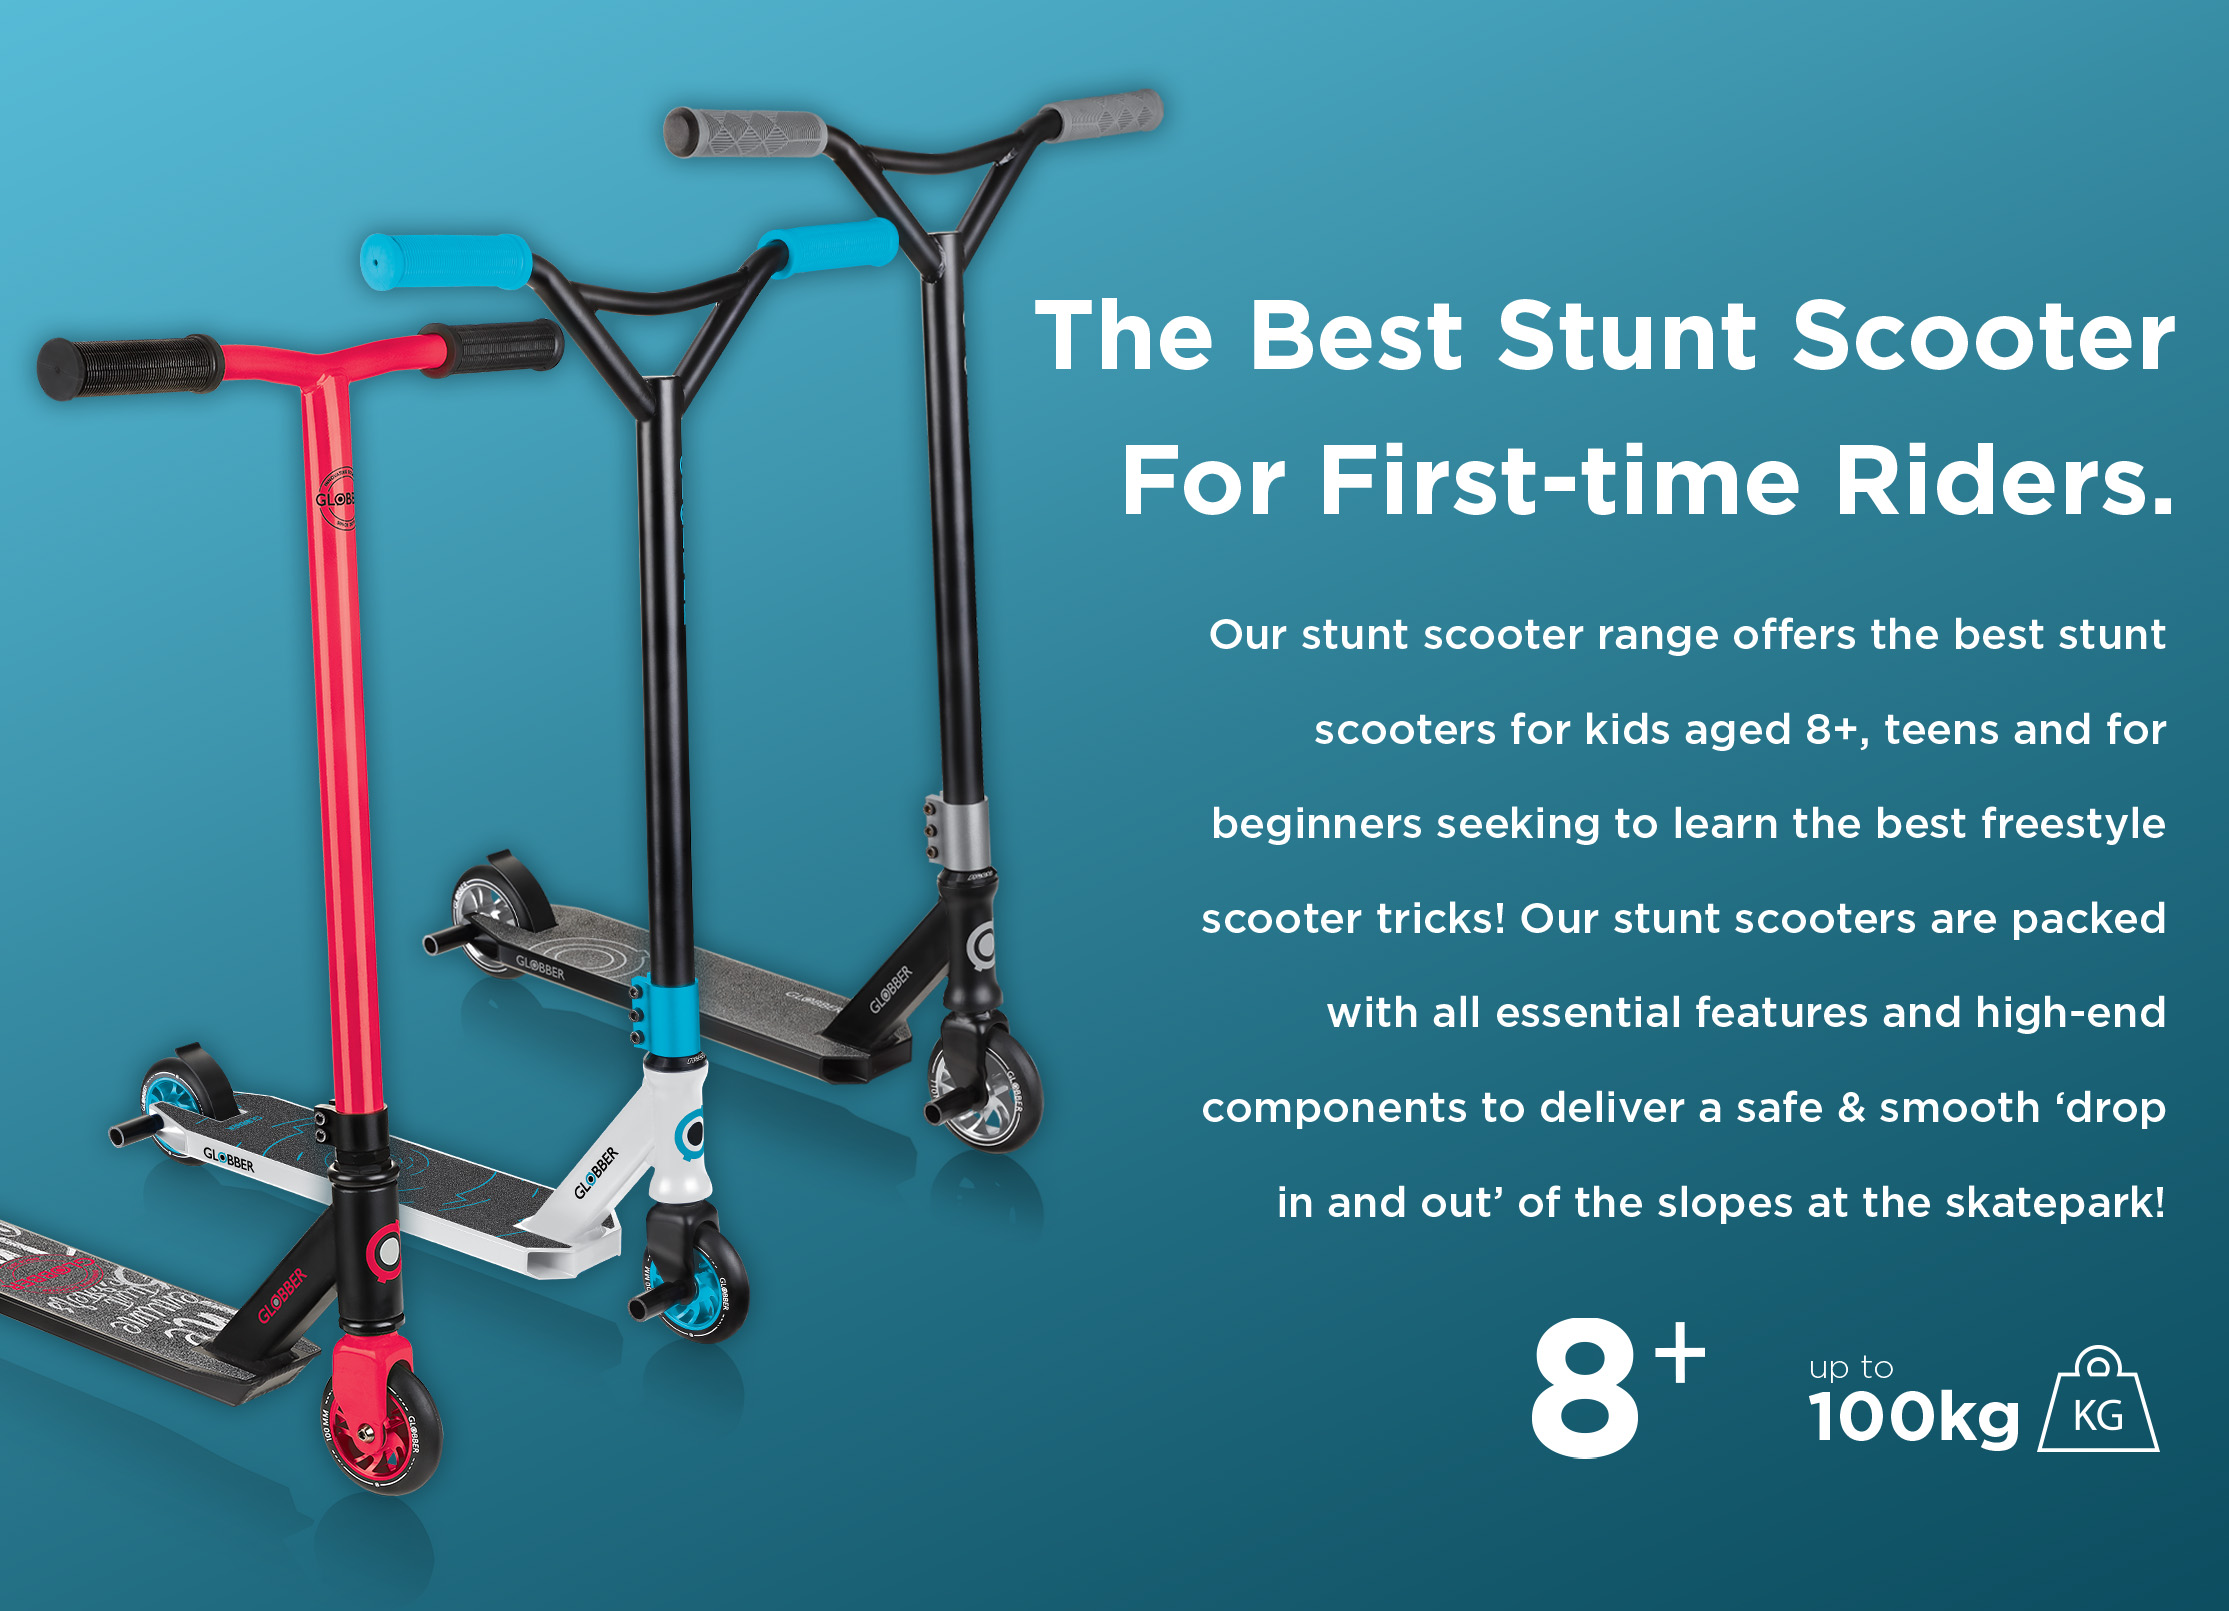 Your freestyle scooting starts here with our GS stunt scooter series, for beginner, intermediate and advanced riders